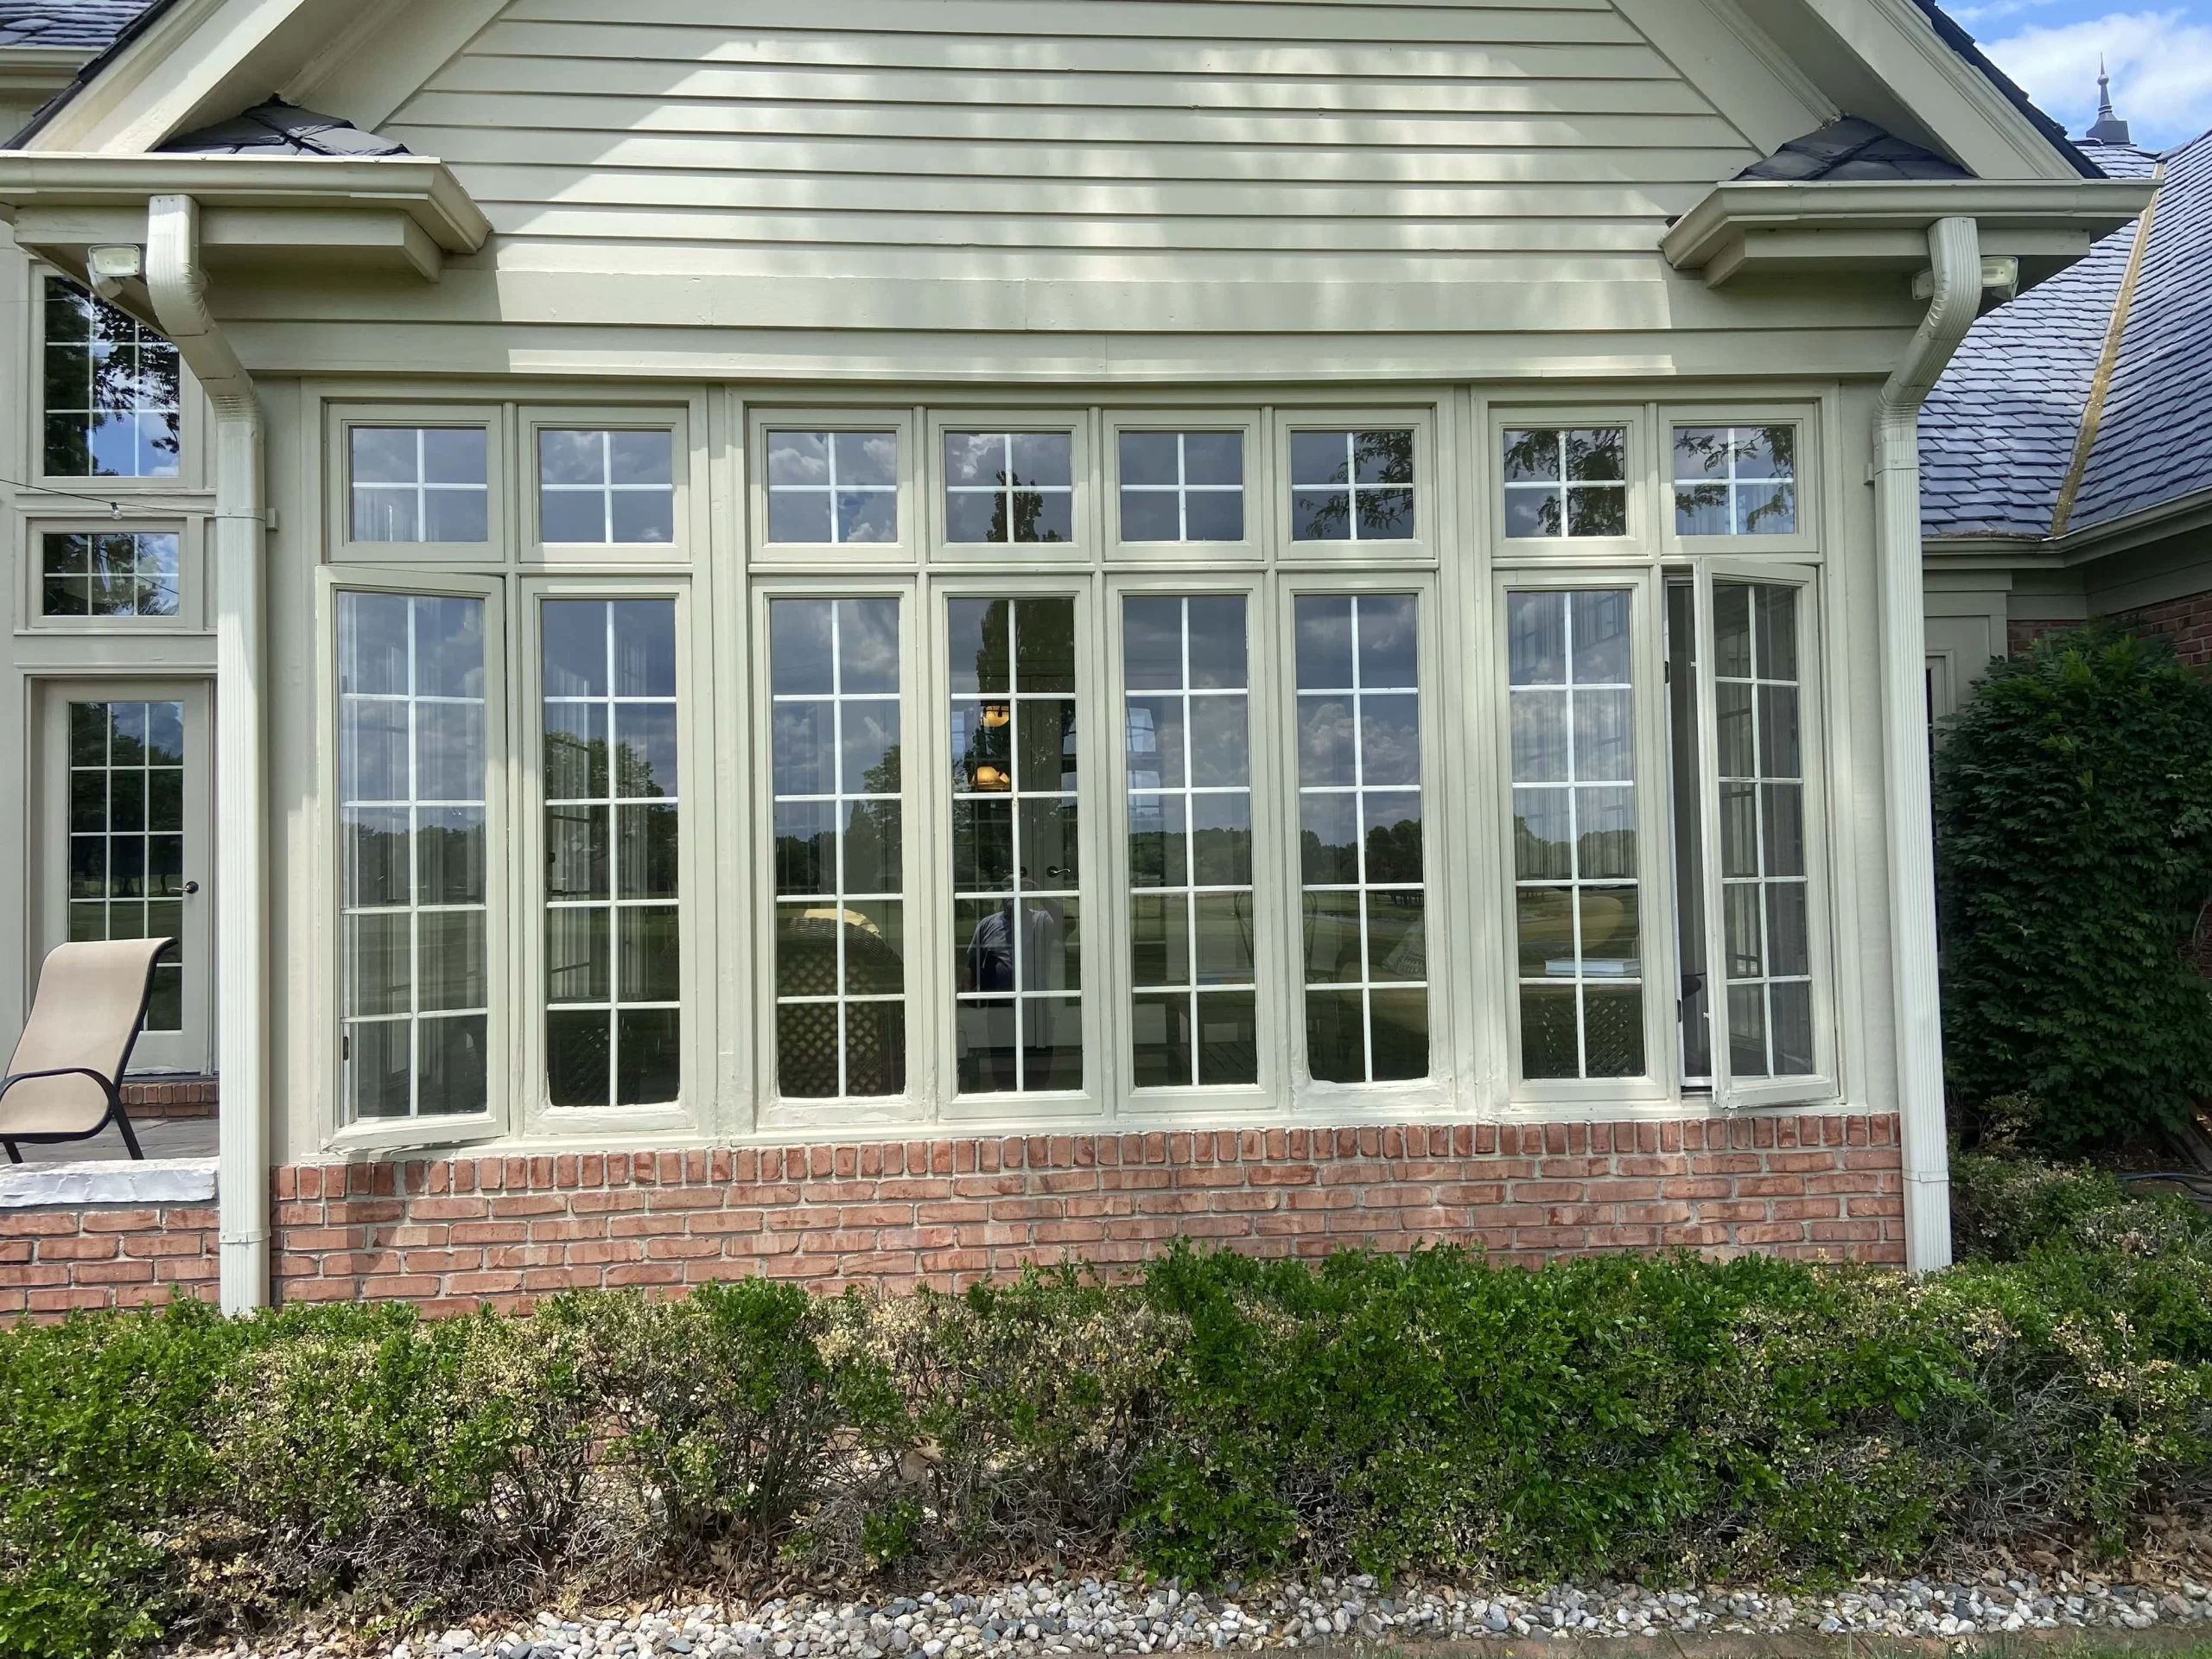 Rotten Wood Window Frame Repair and Restoration in Glenview, IL